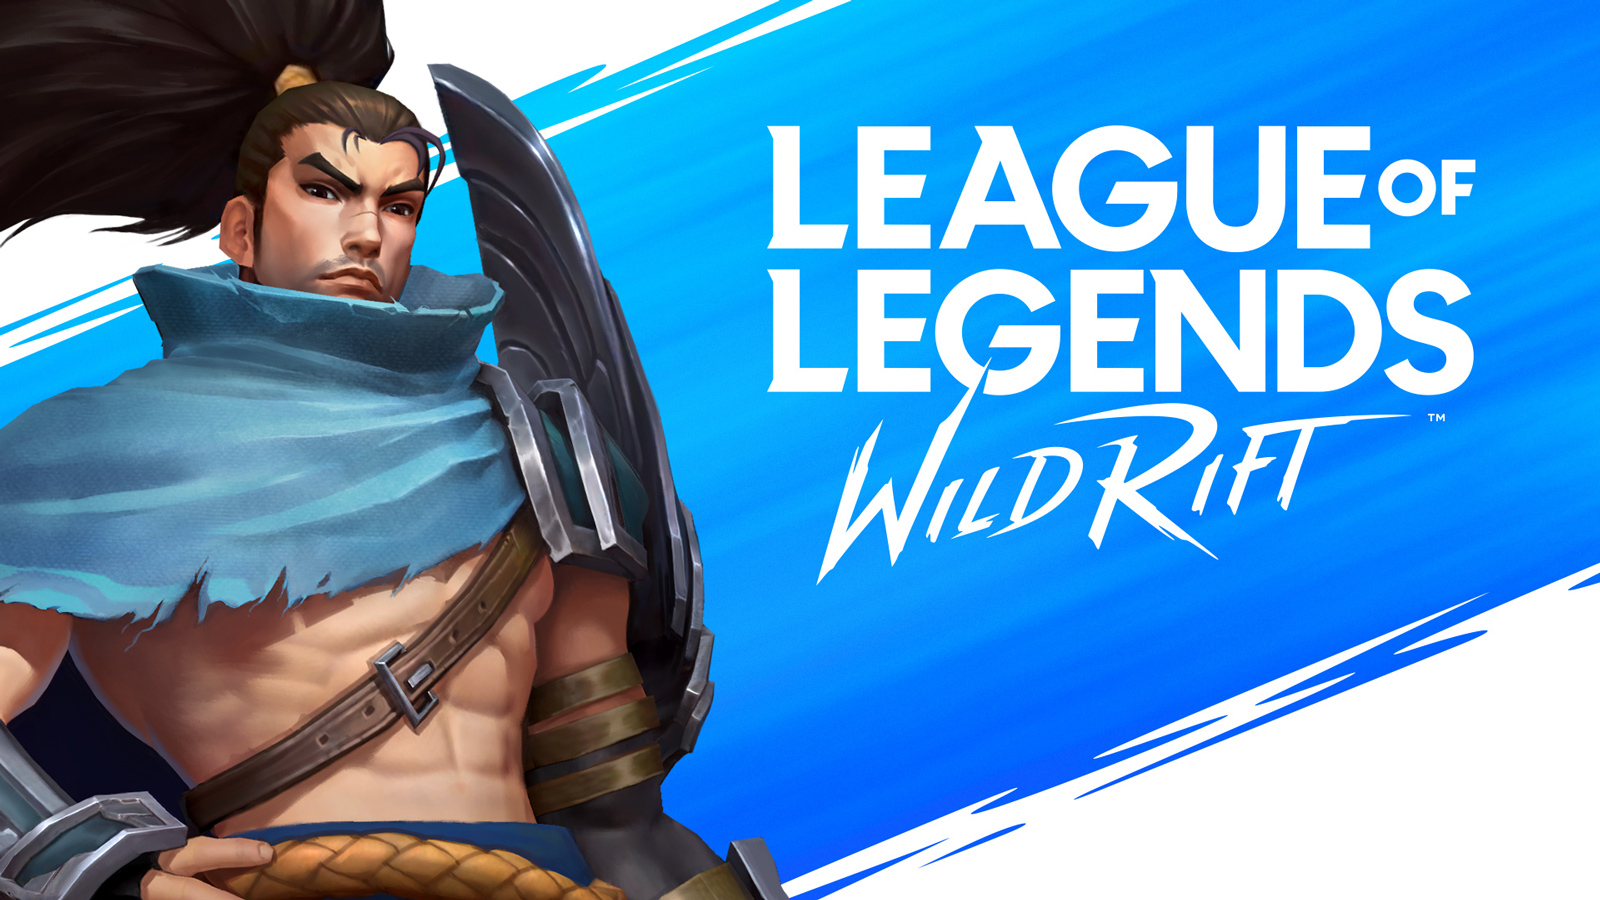 This Is How You Download League Of Legends: Wild Rift On Android And IOS Mobile Devices